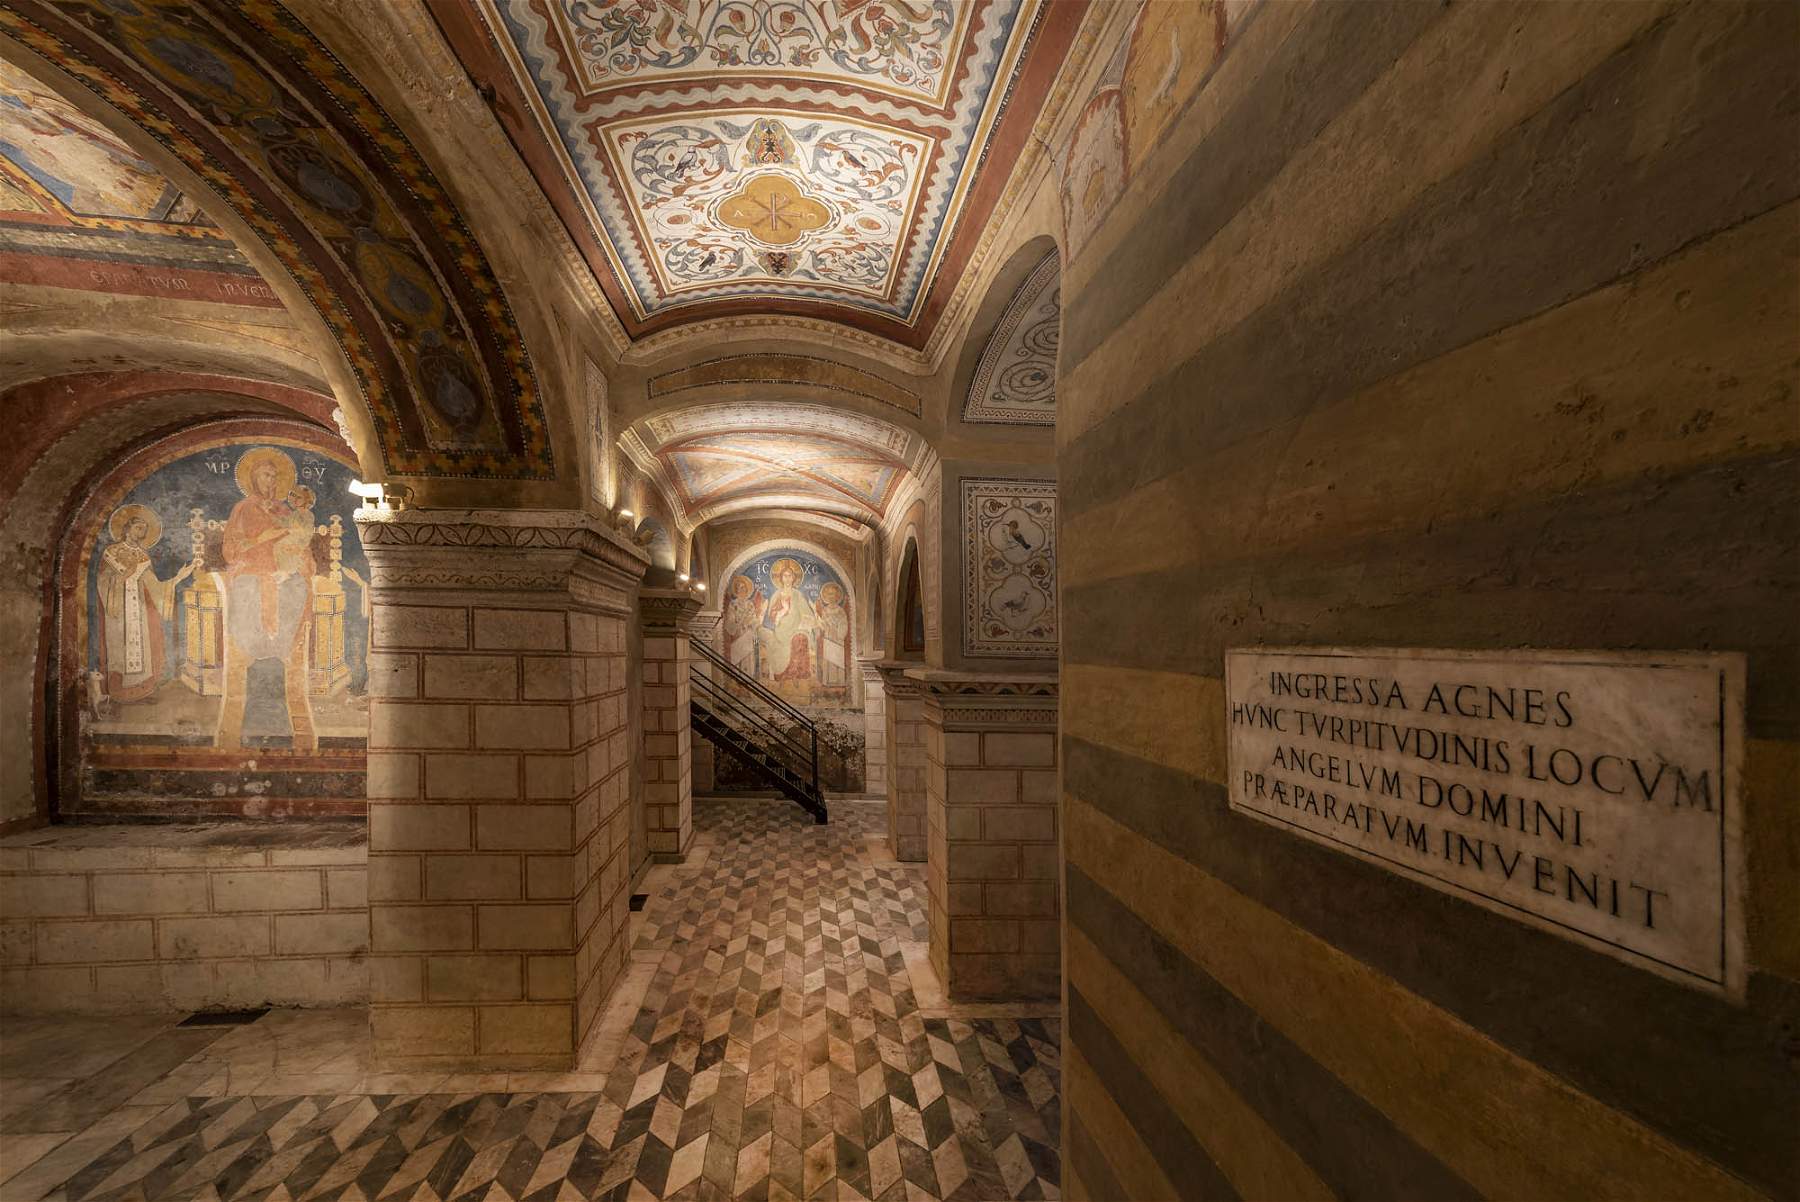 From restoration to new lighting. The rebirth of the Crypt of the Church of Sant'Agnese in Agone.